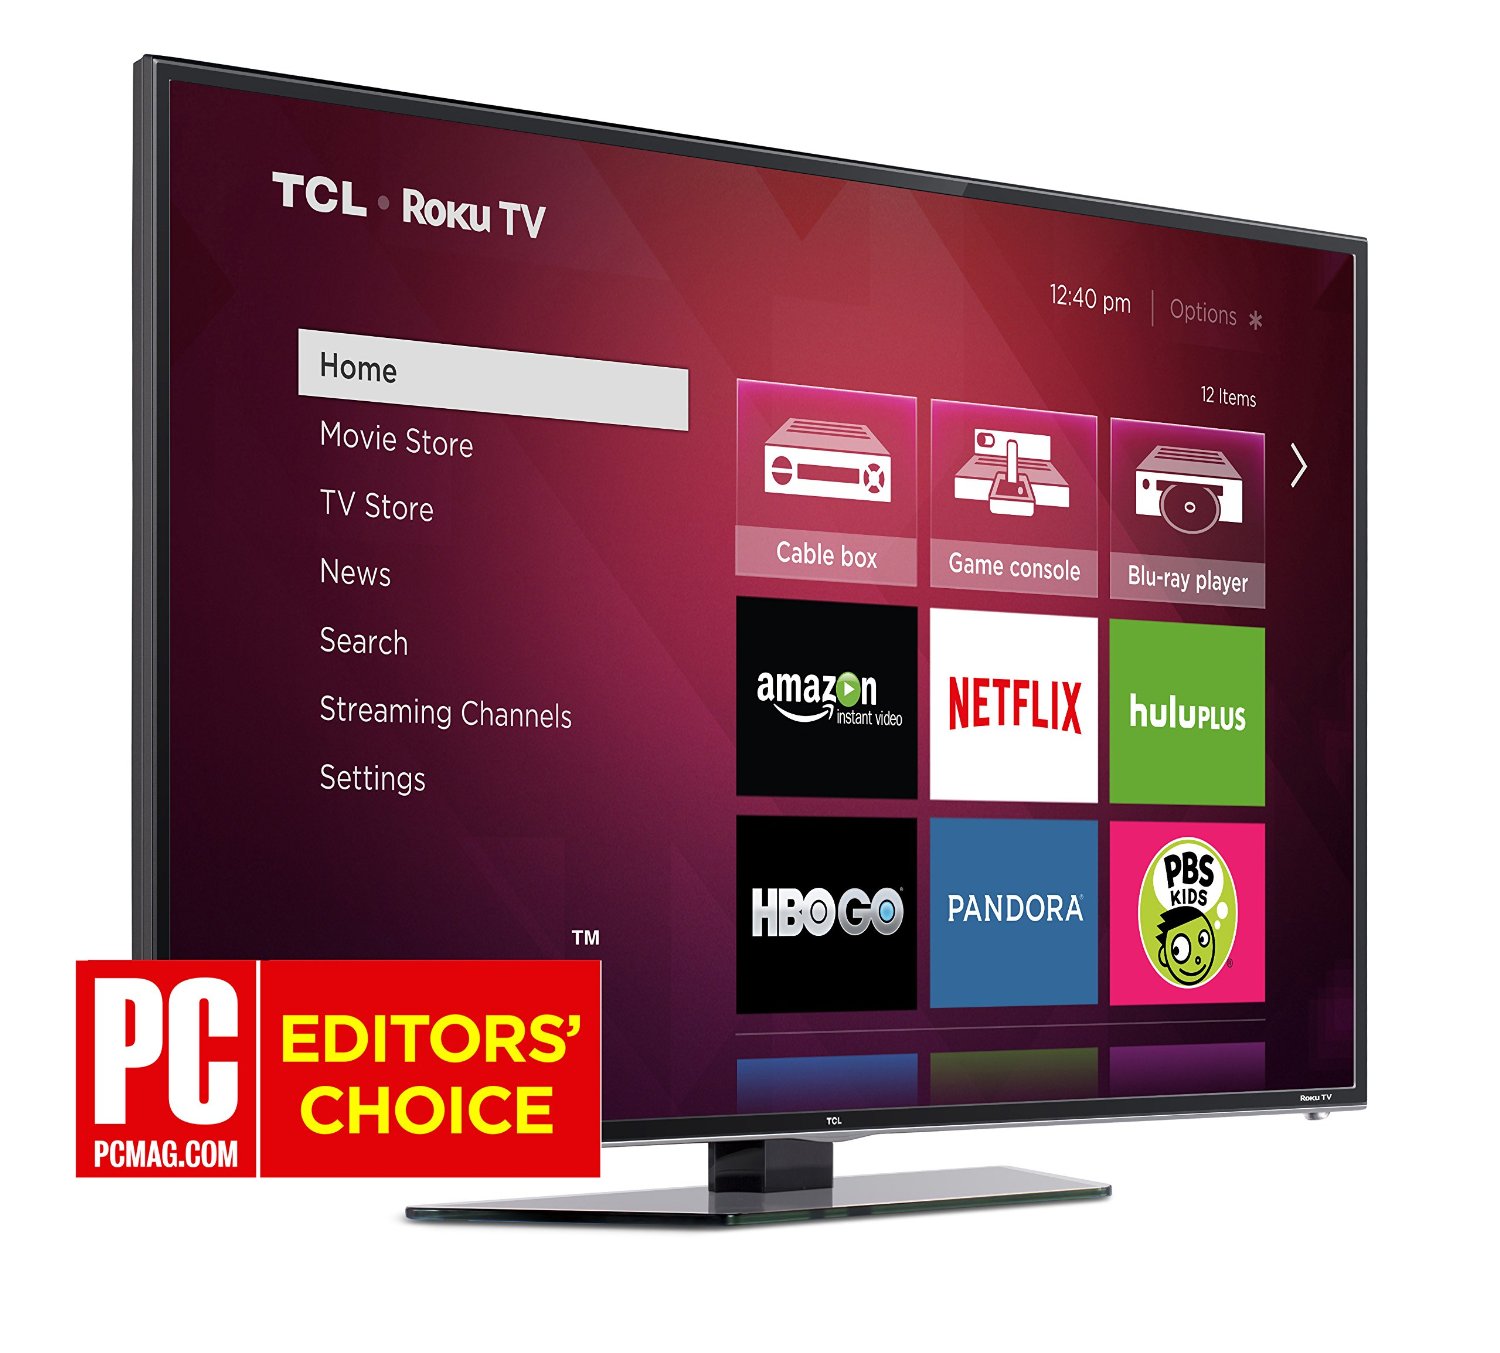 TCL 40 inch Smart LED TV Review and price